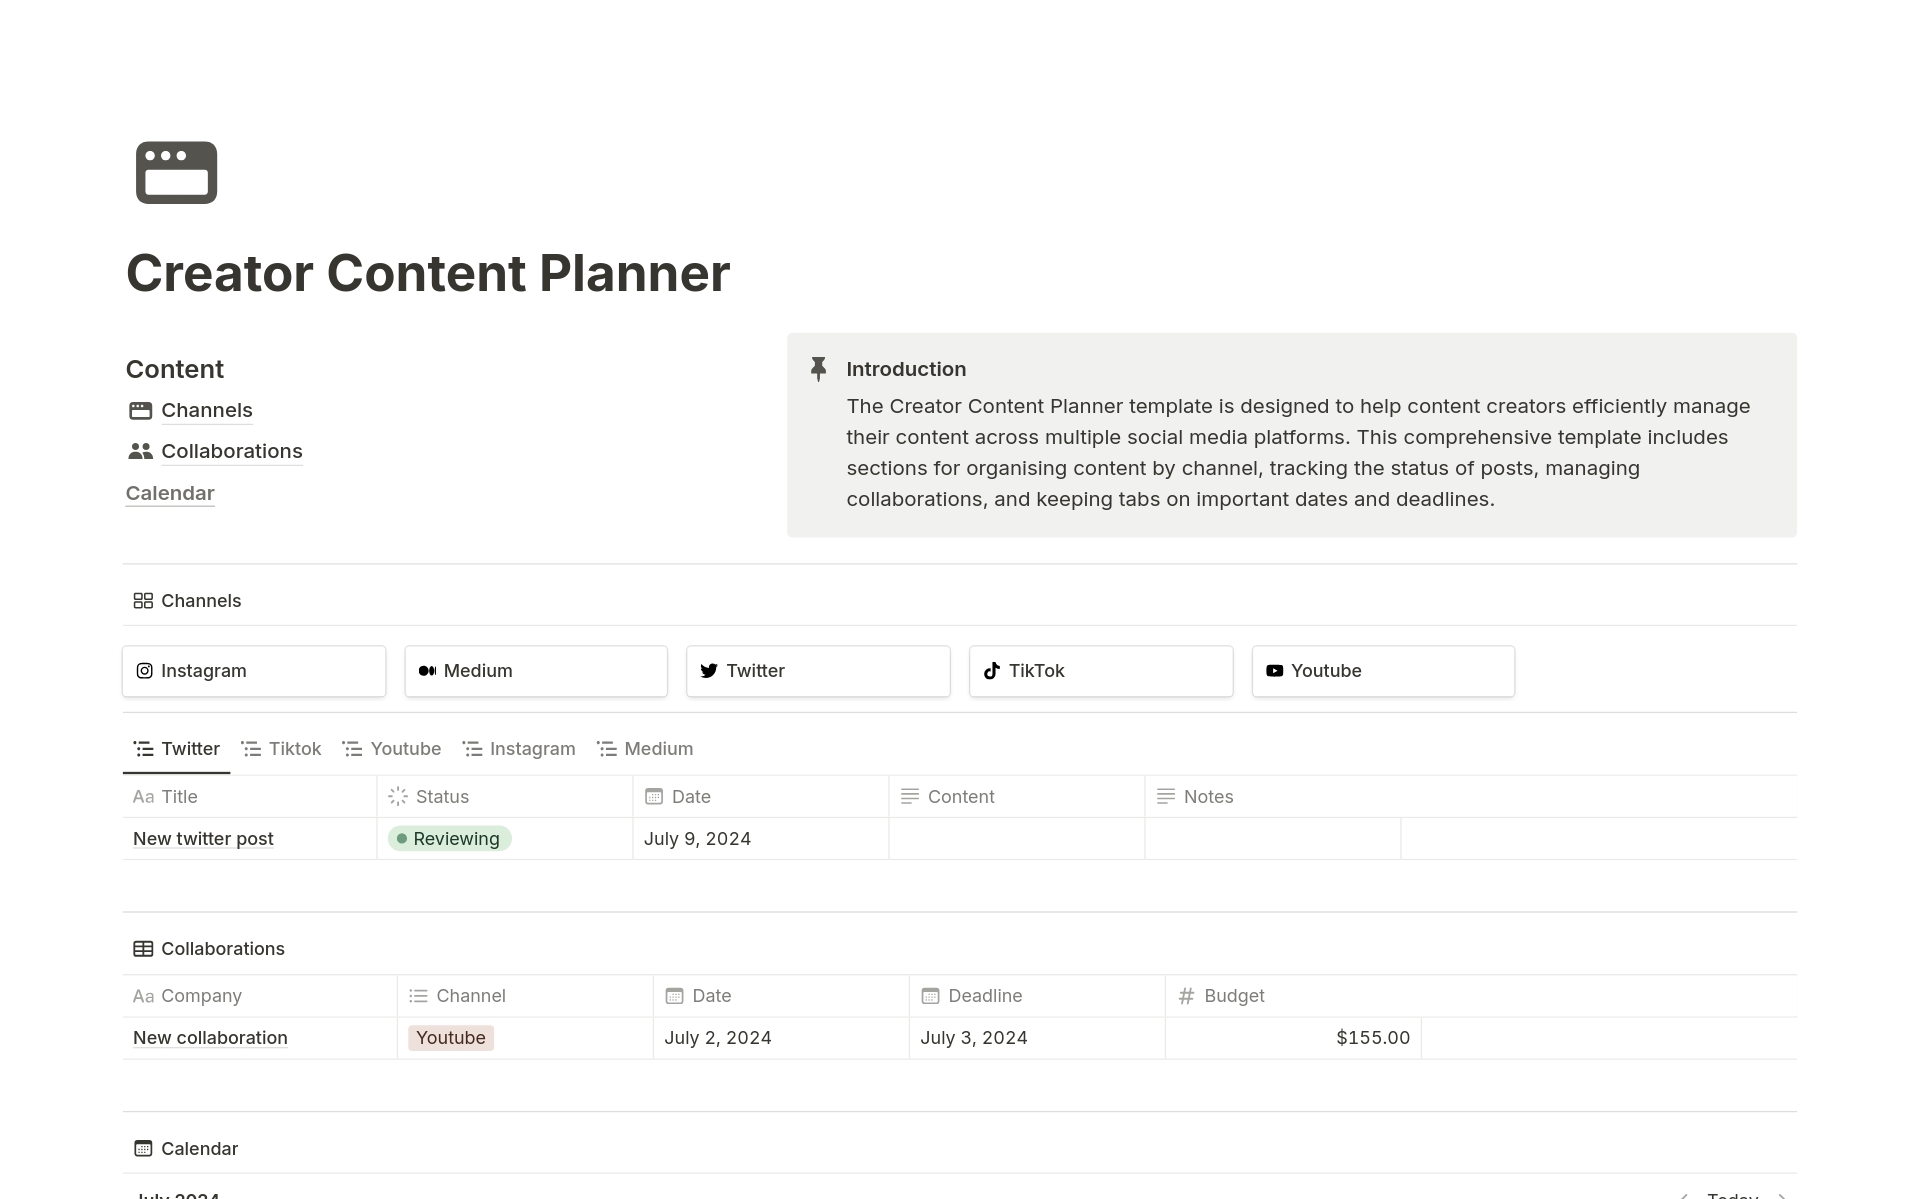 Elevate your content creation game with our Creator Content Planner Template. Keep your ideas organized and your schedule on track. Ready to create consistently great content?